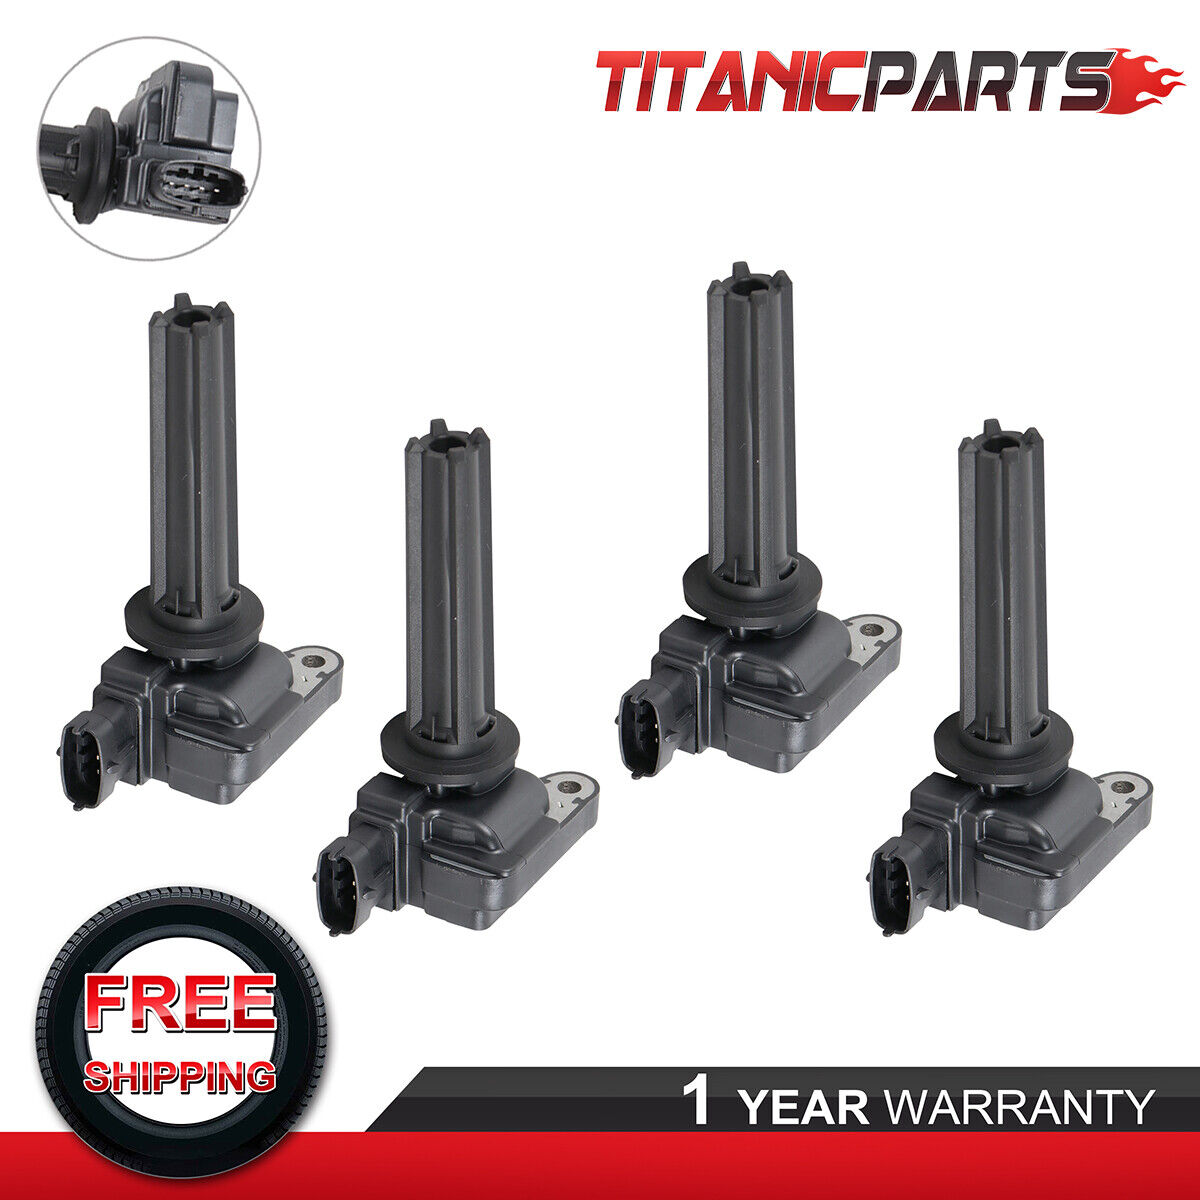 4PCS New Ignition Coils For 03-11 Saab 9-3 10-11 9-3X 2.0L Turbo4 Replaces UF526